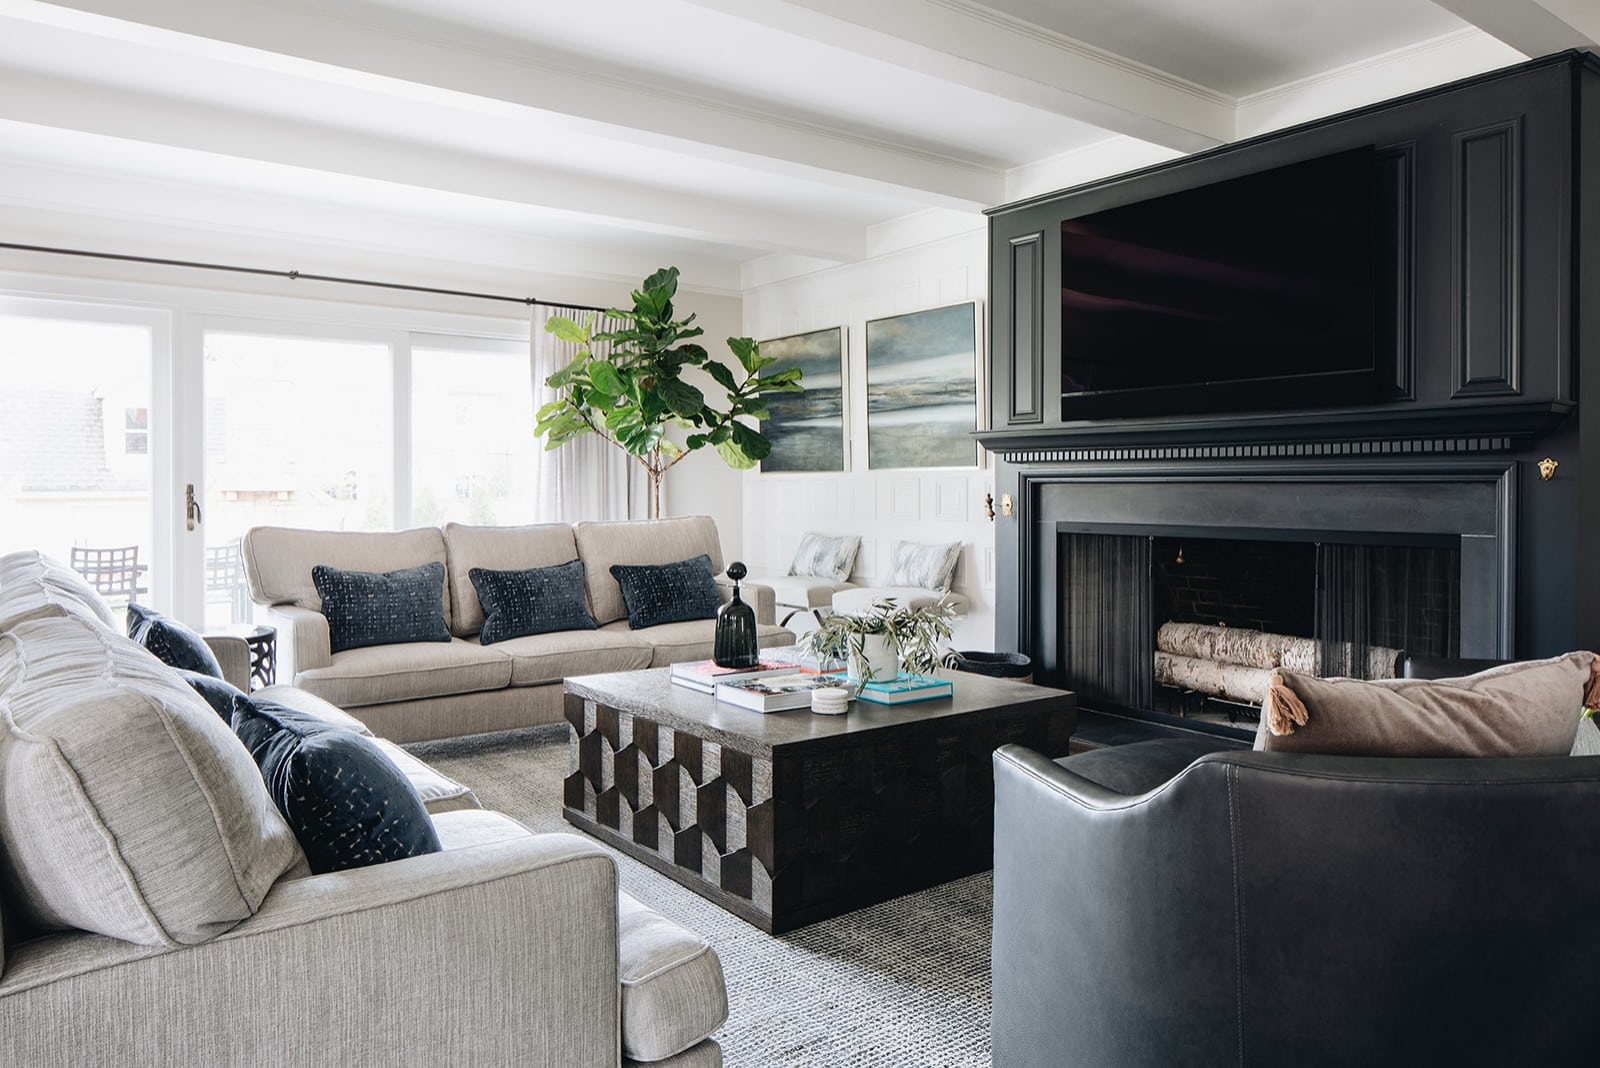 Home tour featuring family room with modern and traditional decor in dark blue, cream and charcoal